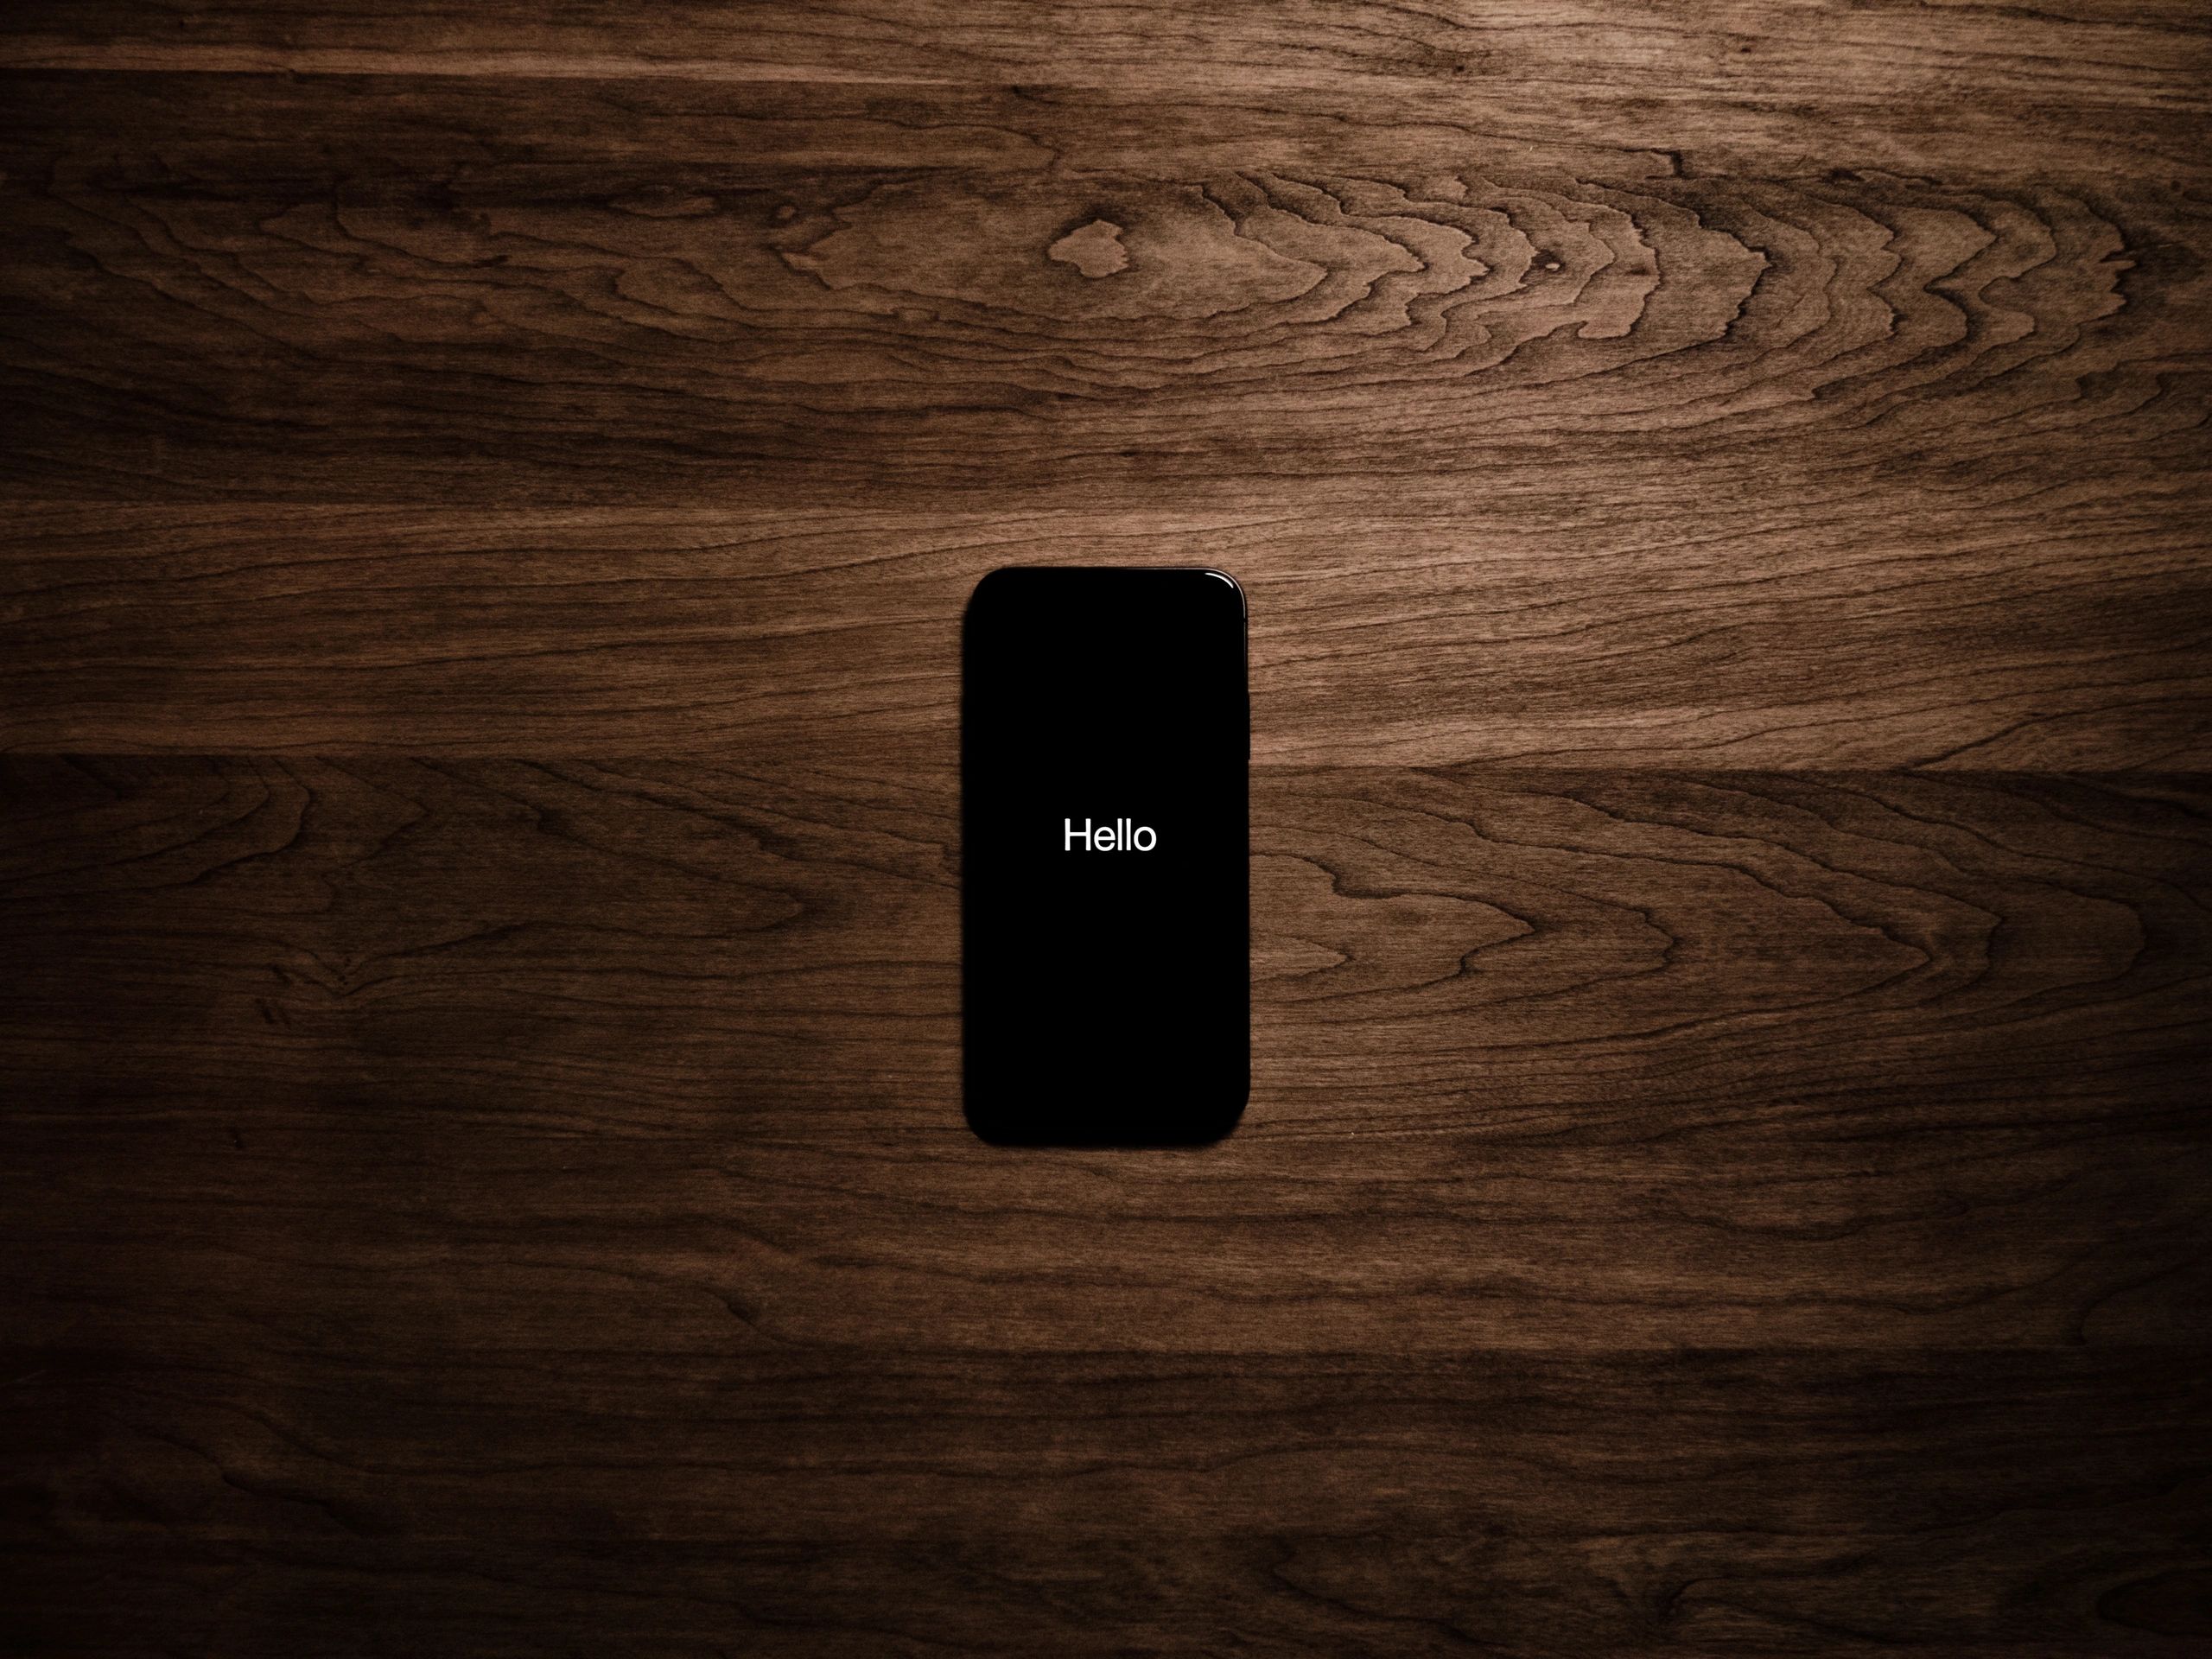 picture of a cell phone on a wooden background. The cell phone screen says "Hello"